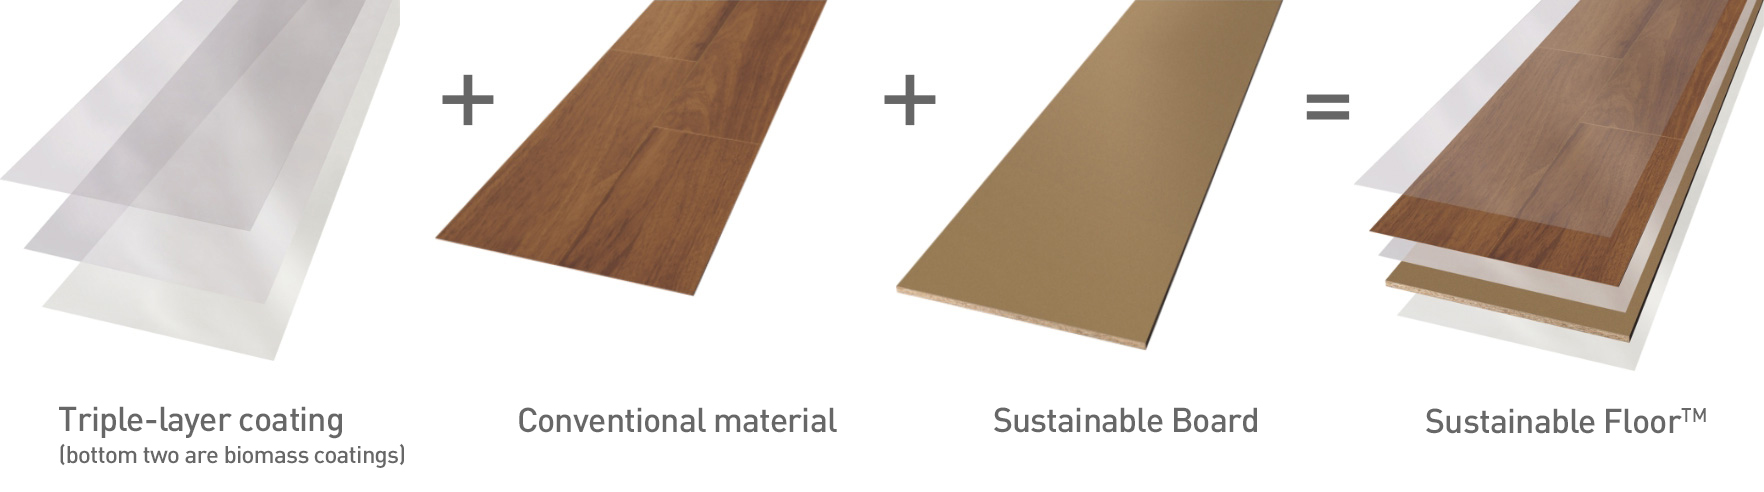 Image of Sustainable Floor™ coated with three layers